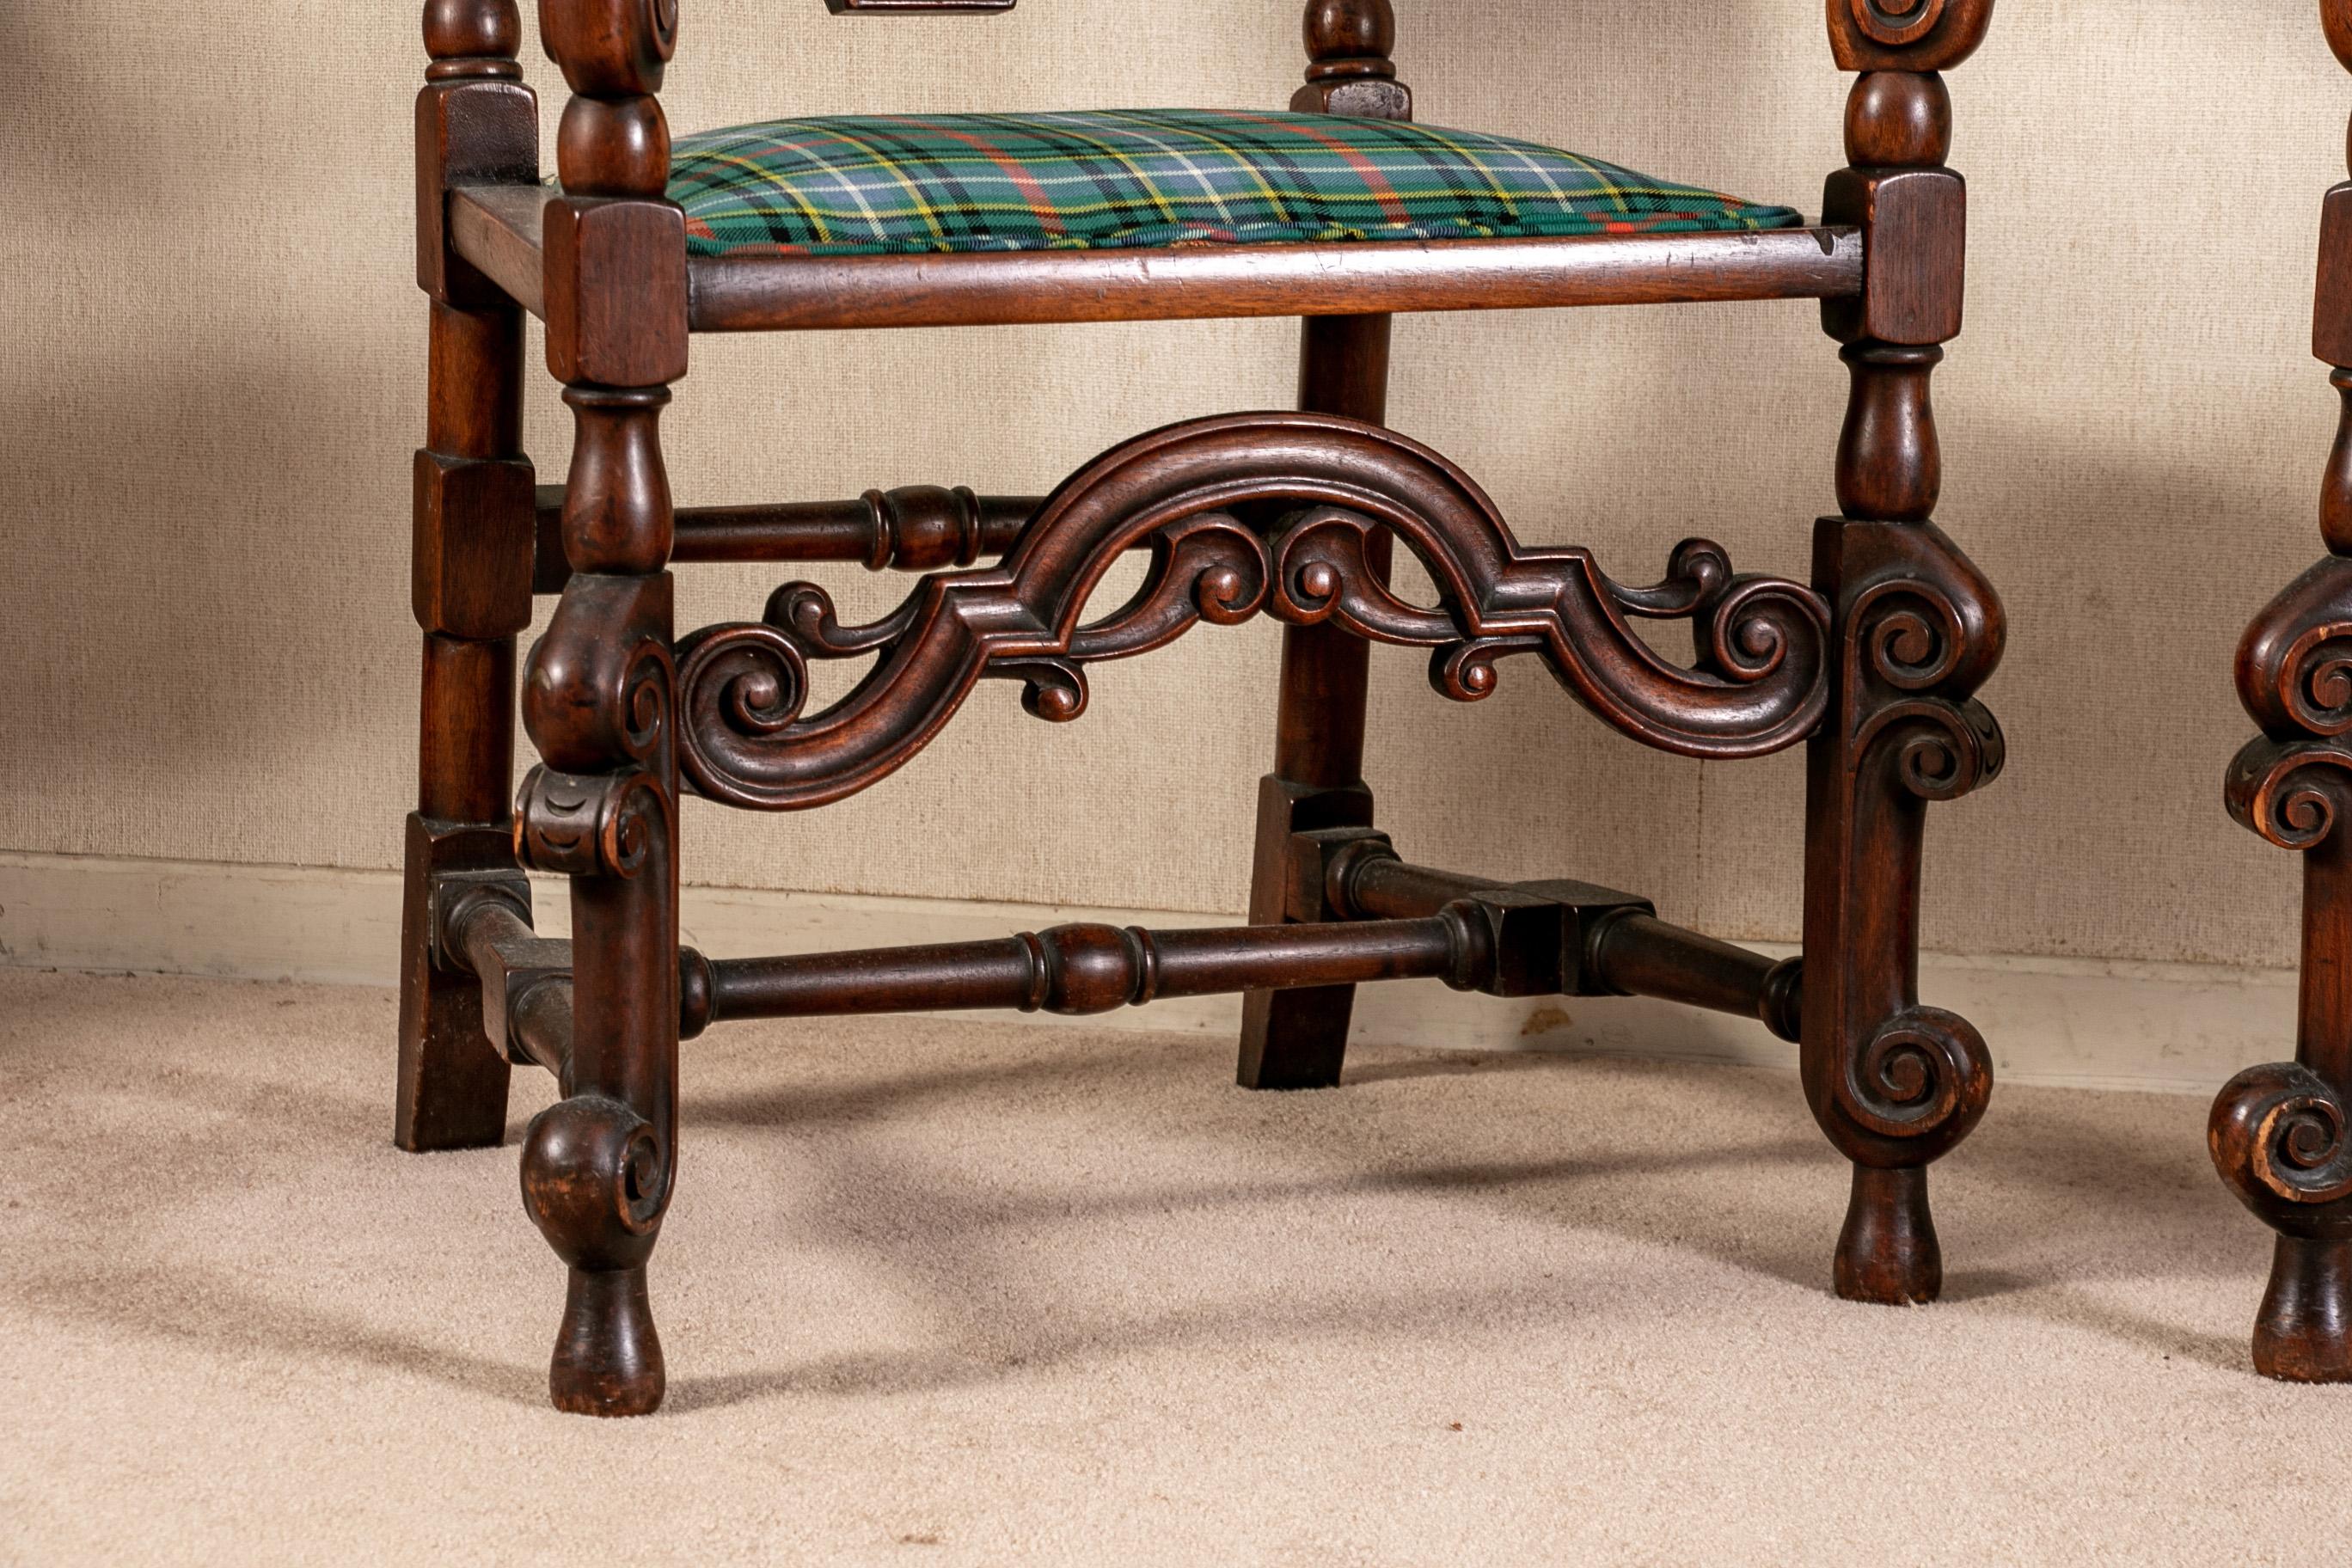 Pair of antique English carved hall chairs in a tartan plaid, with openwork scrolled crest rails and front frames. Scrolled arms, turned legs and H stretchers, and a stretcher at the back. Blue plaid upholstery. Retailed by B. Altman & Co., New York